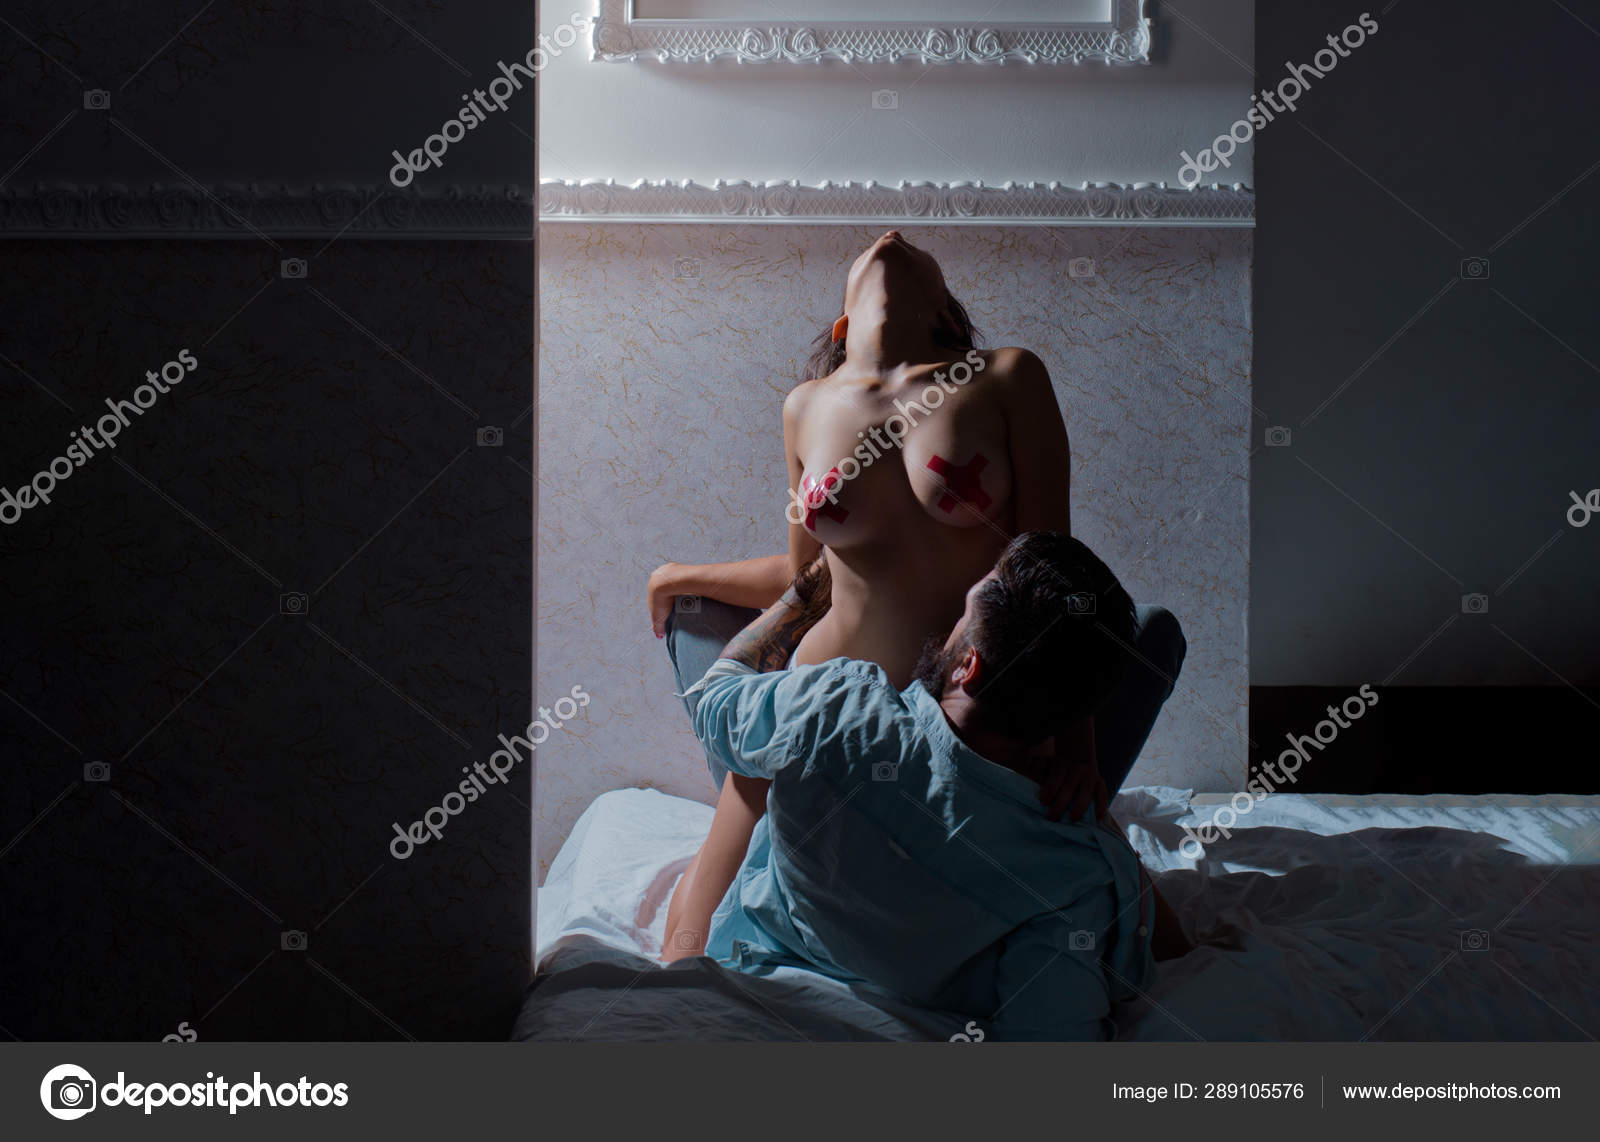 An intense sensation of pleasure or orgasm. Sensual woman and man reaching orgasm picture